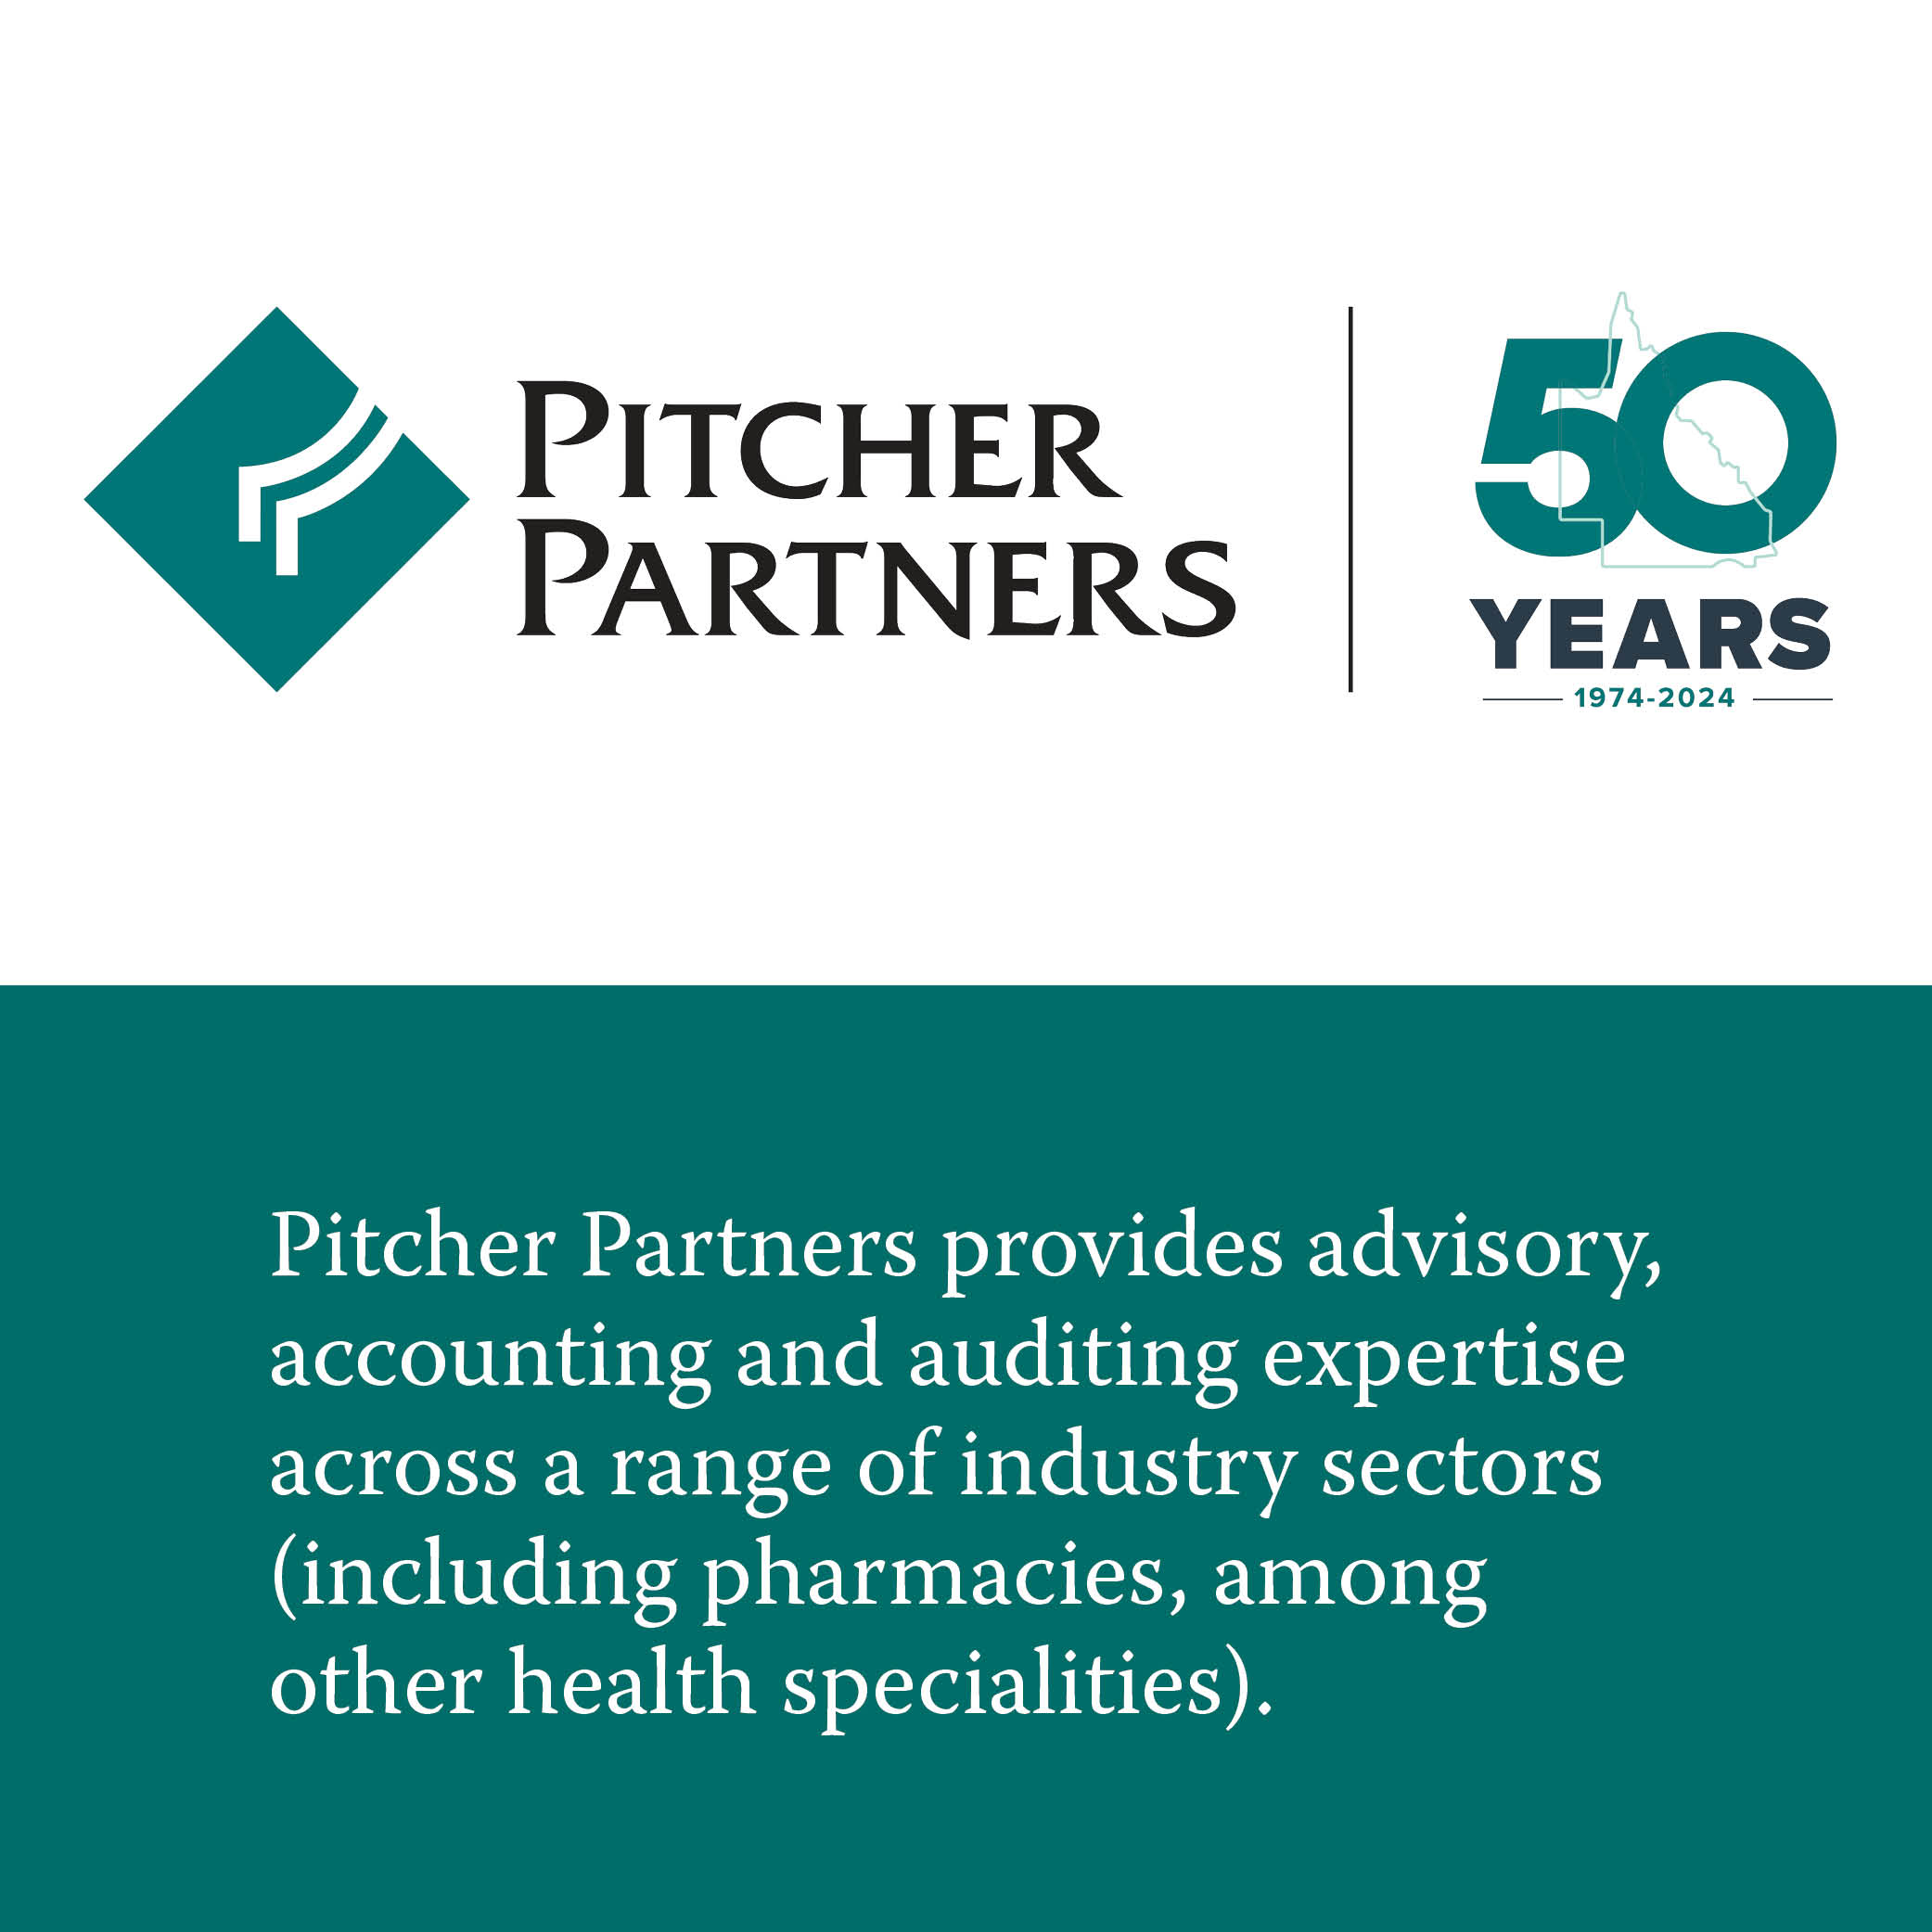 Business Directory Website Graphics_Pitcher Partners